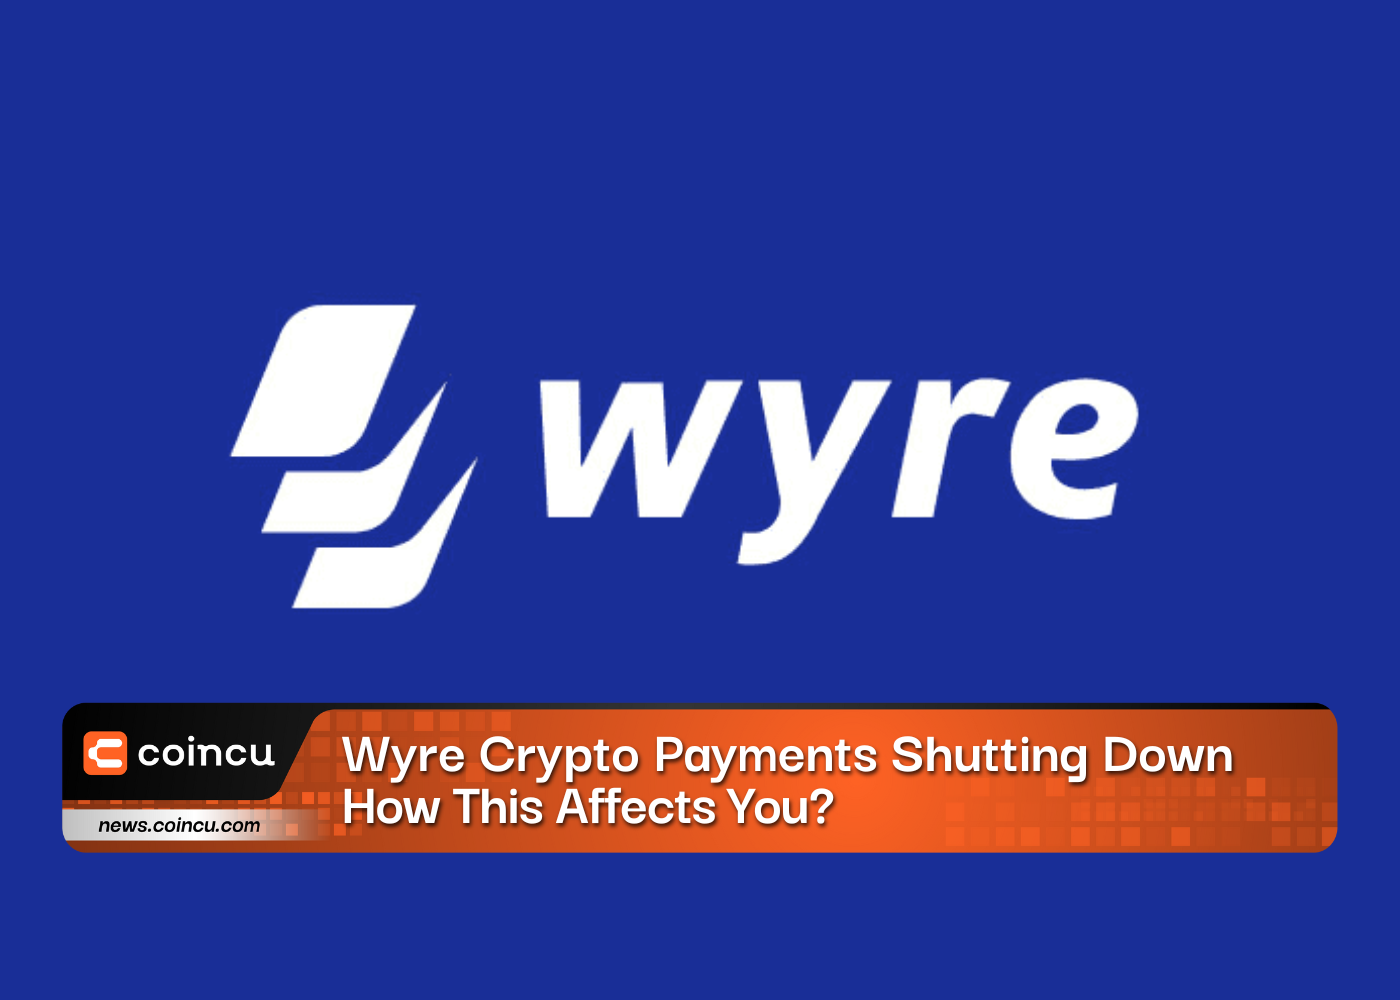 Wyre Crypto Payments Shutting Down